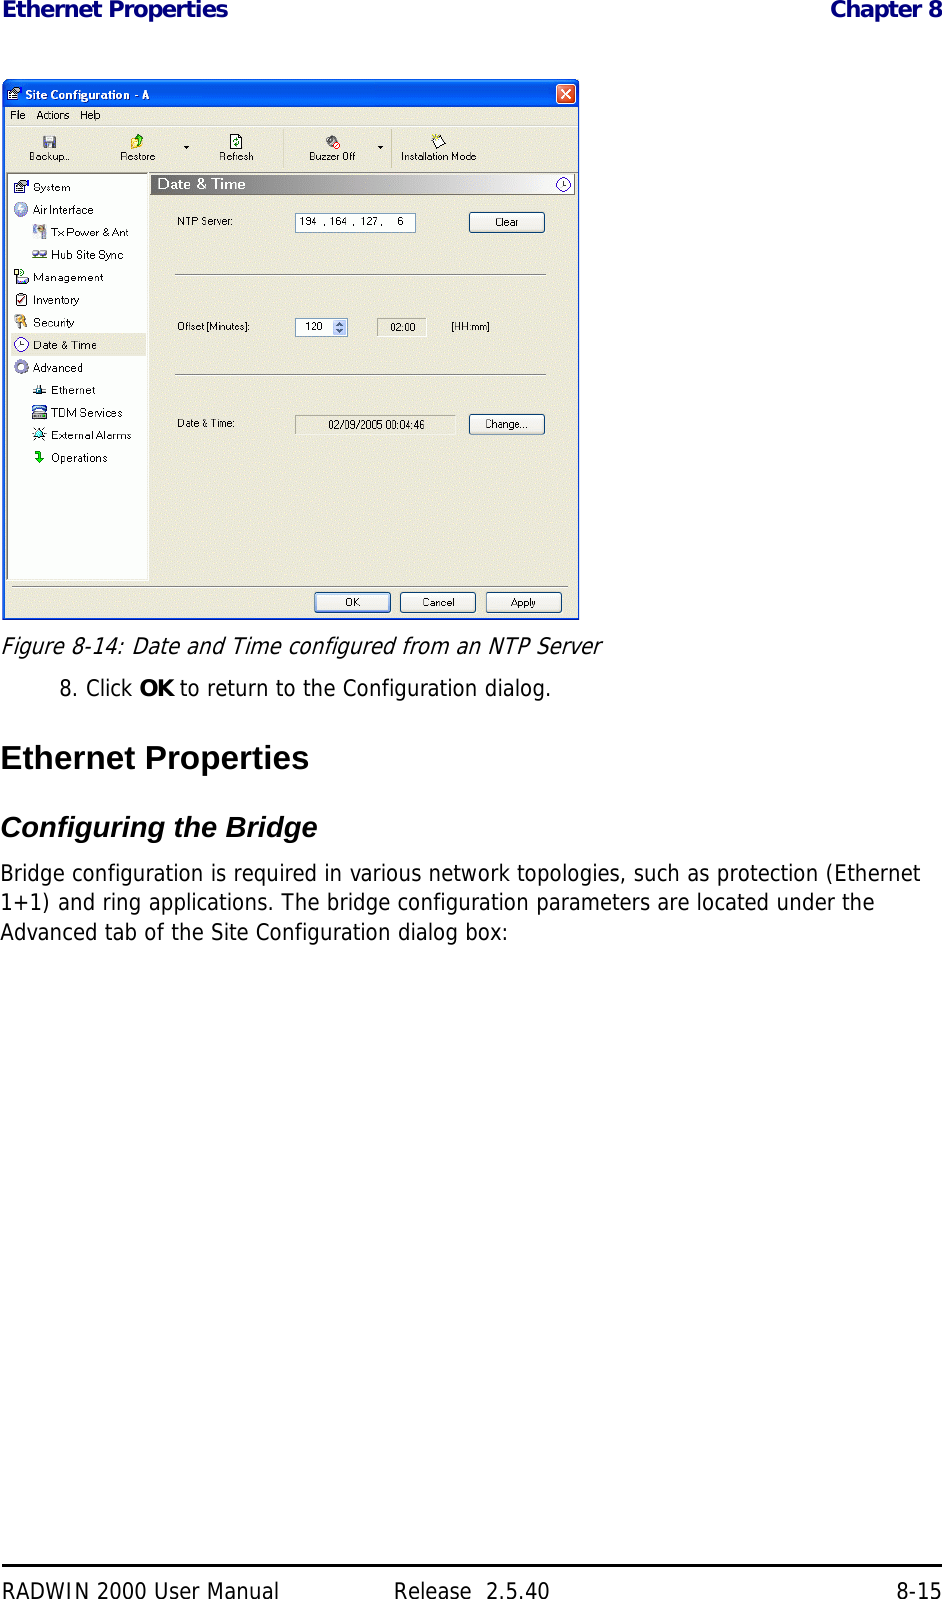 Ethernet Properties Chapter 8RADWIN 2000 User Manual Release  2.5.40 8-15Figure 8-14: Date and Time configured from an NTP Server8. Click OK to return to the Configuration dialog.Ethernet PropertiesConfiguring the Bridge Bridge configuration is required in various network topologies, such as protection (Ethernet 1+1) and ring applications. The bridge configuration parameters are located under the Advanced tab of the Site Configuration dialog box: